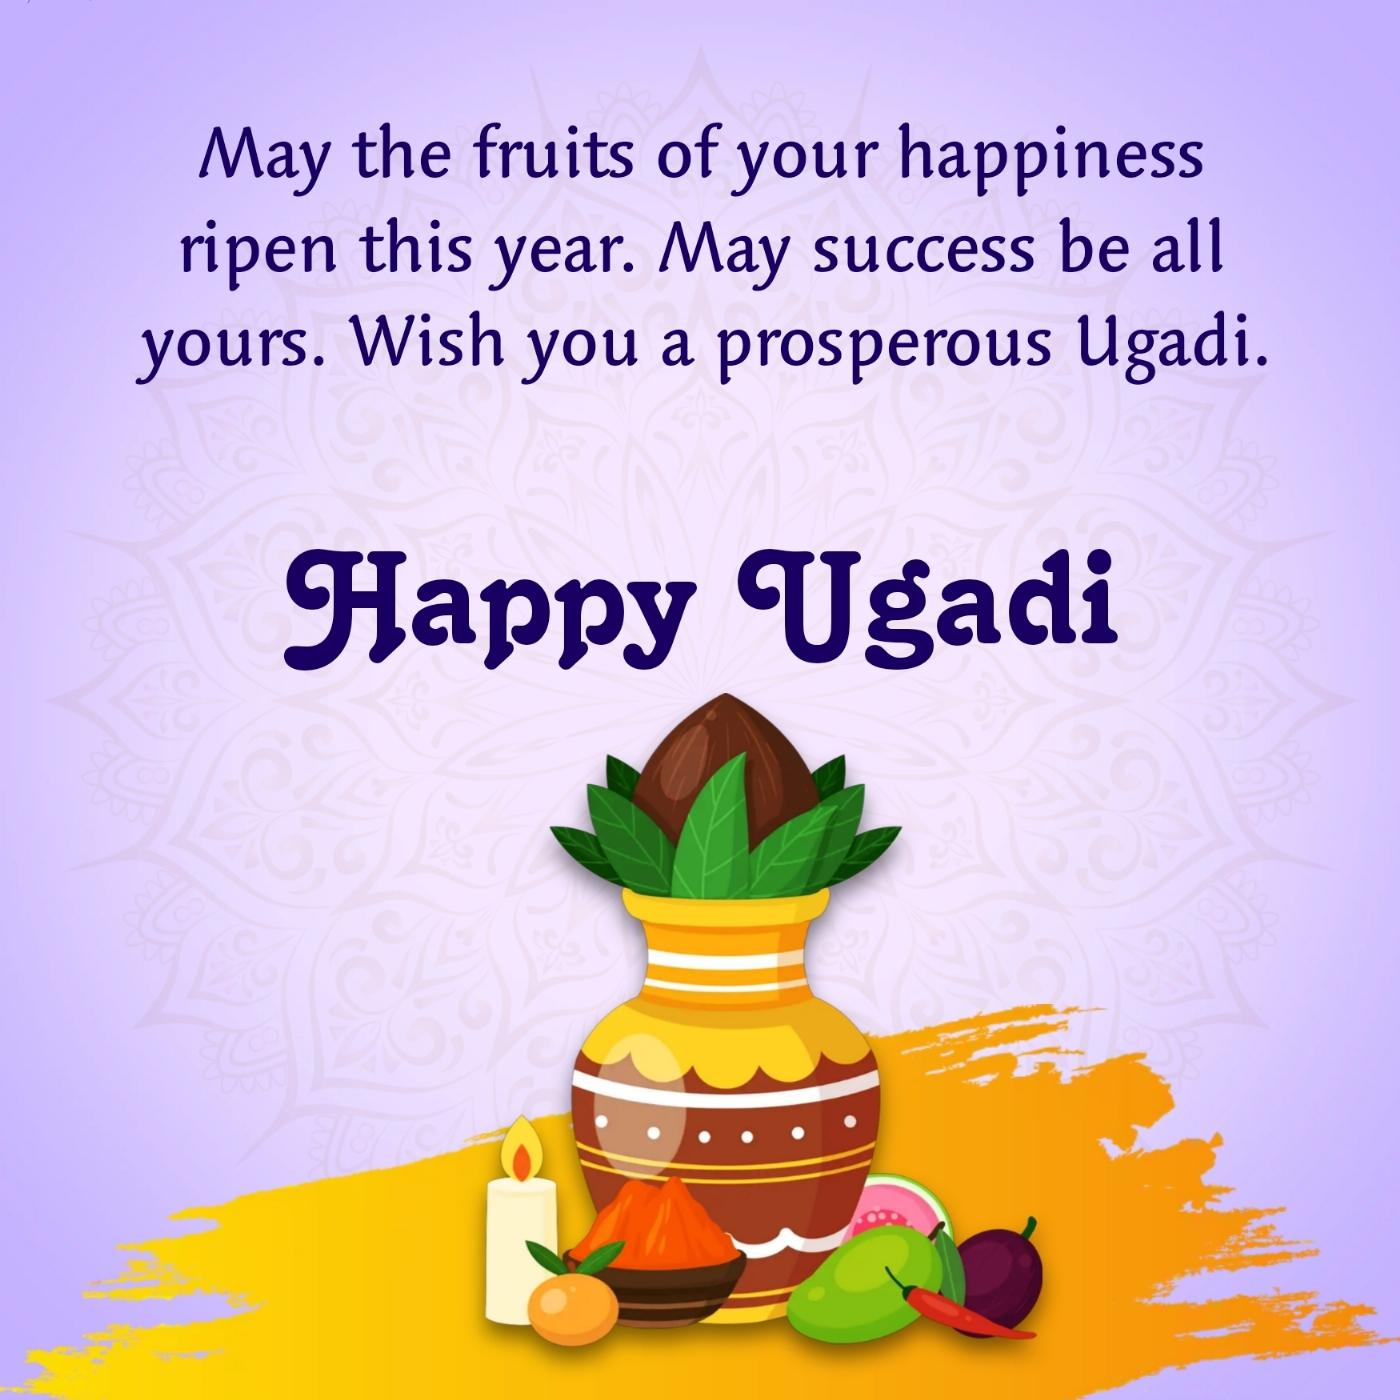 May the fruits of your happiness ripen this year